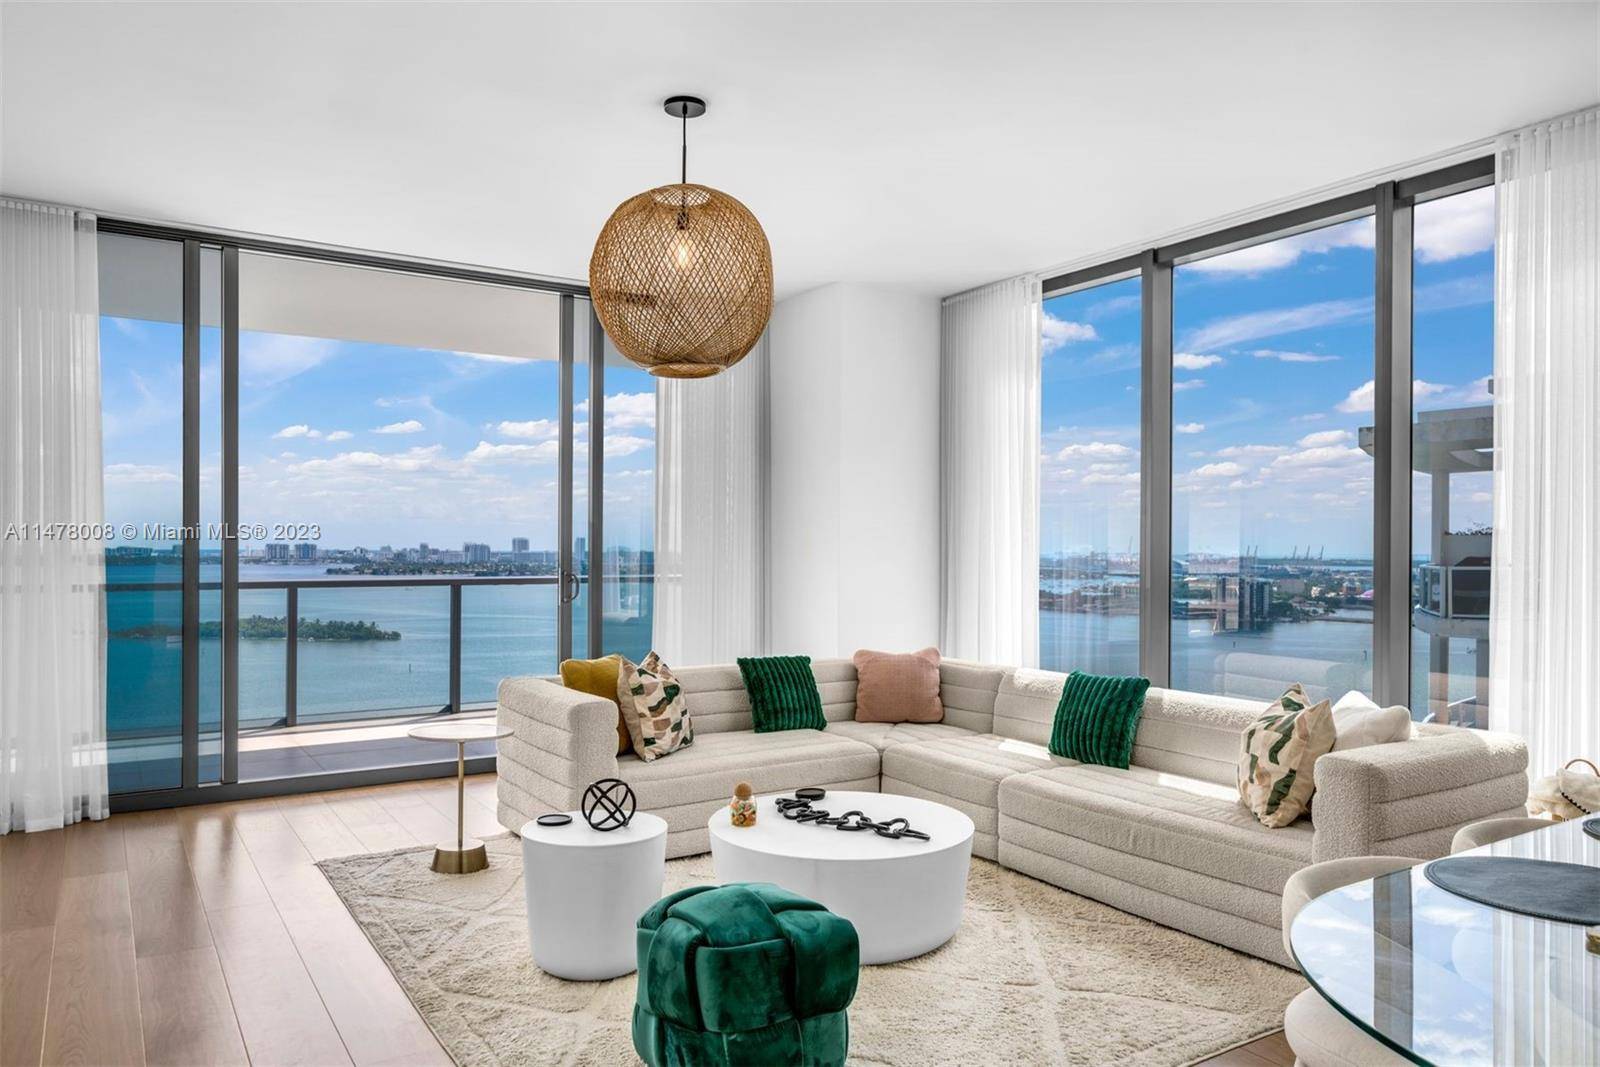 Presenting Elysee s premier SE corner floor plan with direct open bayfront views and incredible natural sunlight.